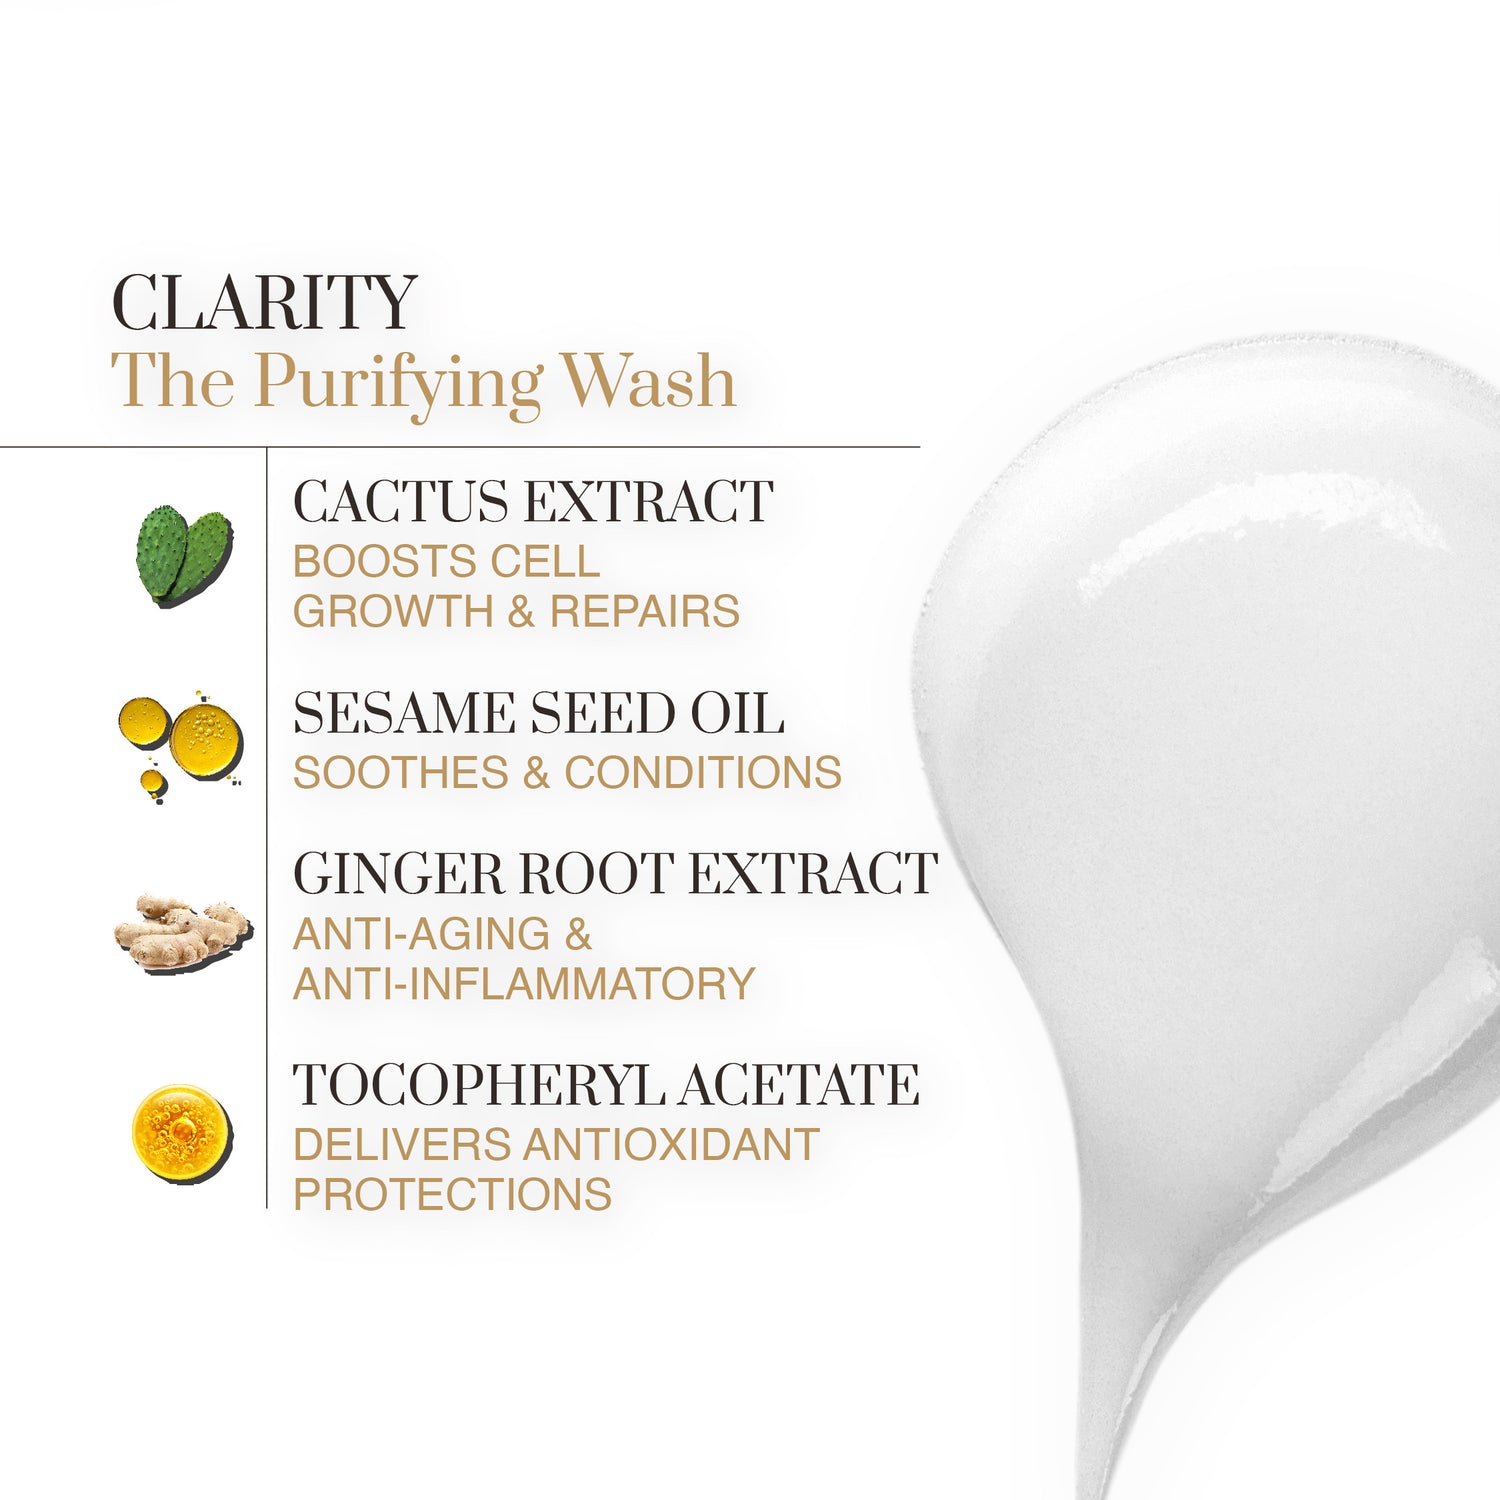 CLARITY The Purifying Wash